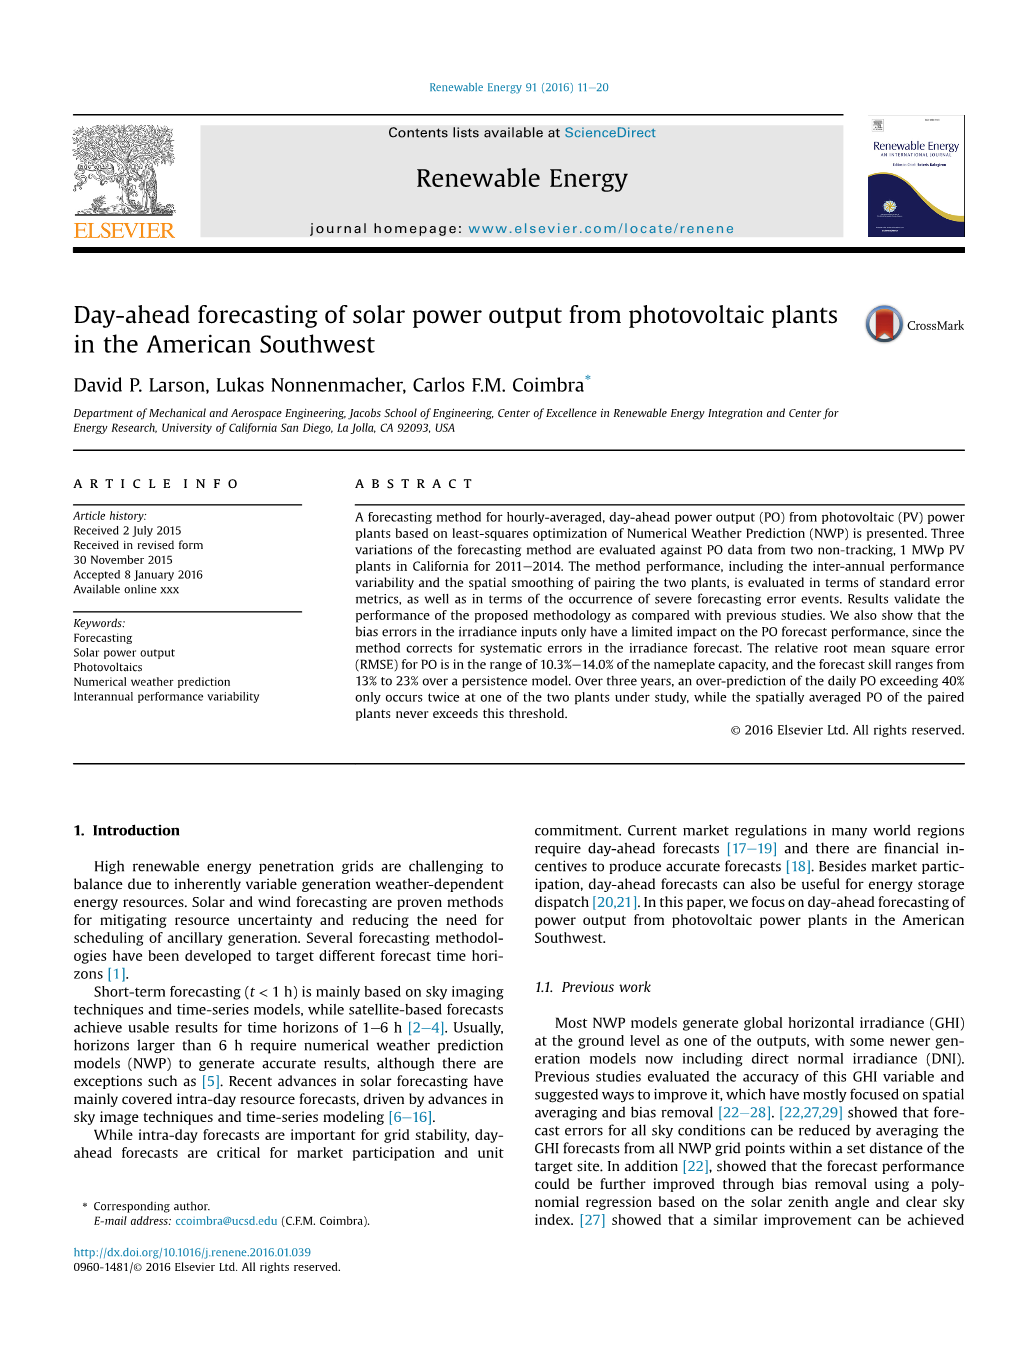 Day-Ahead Forecasting of Solar Power Output from Photovoltaic Plants in the American Southwest